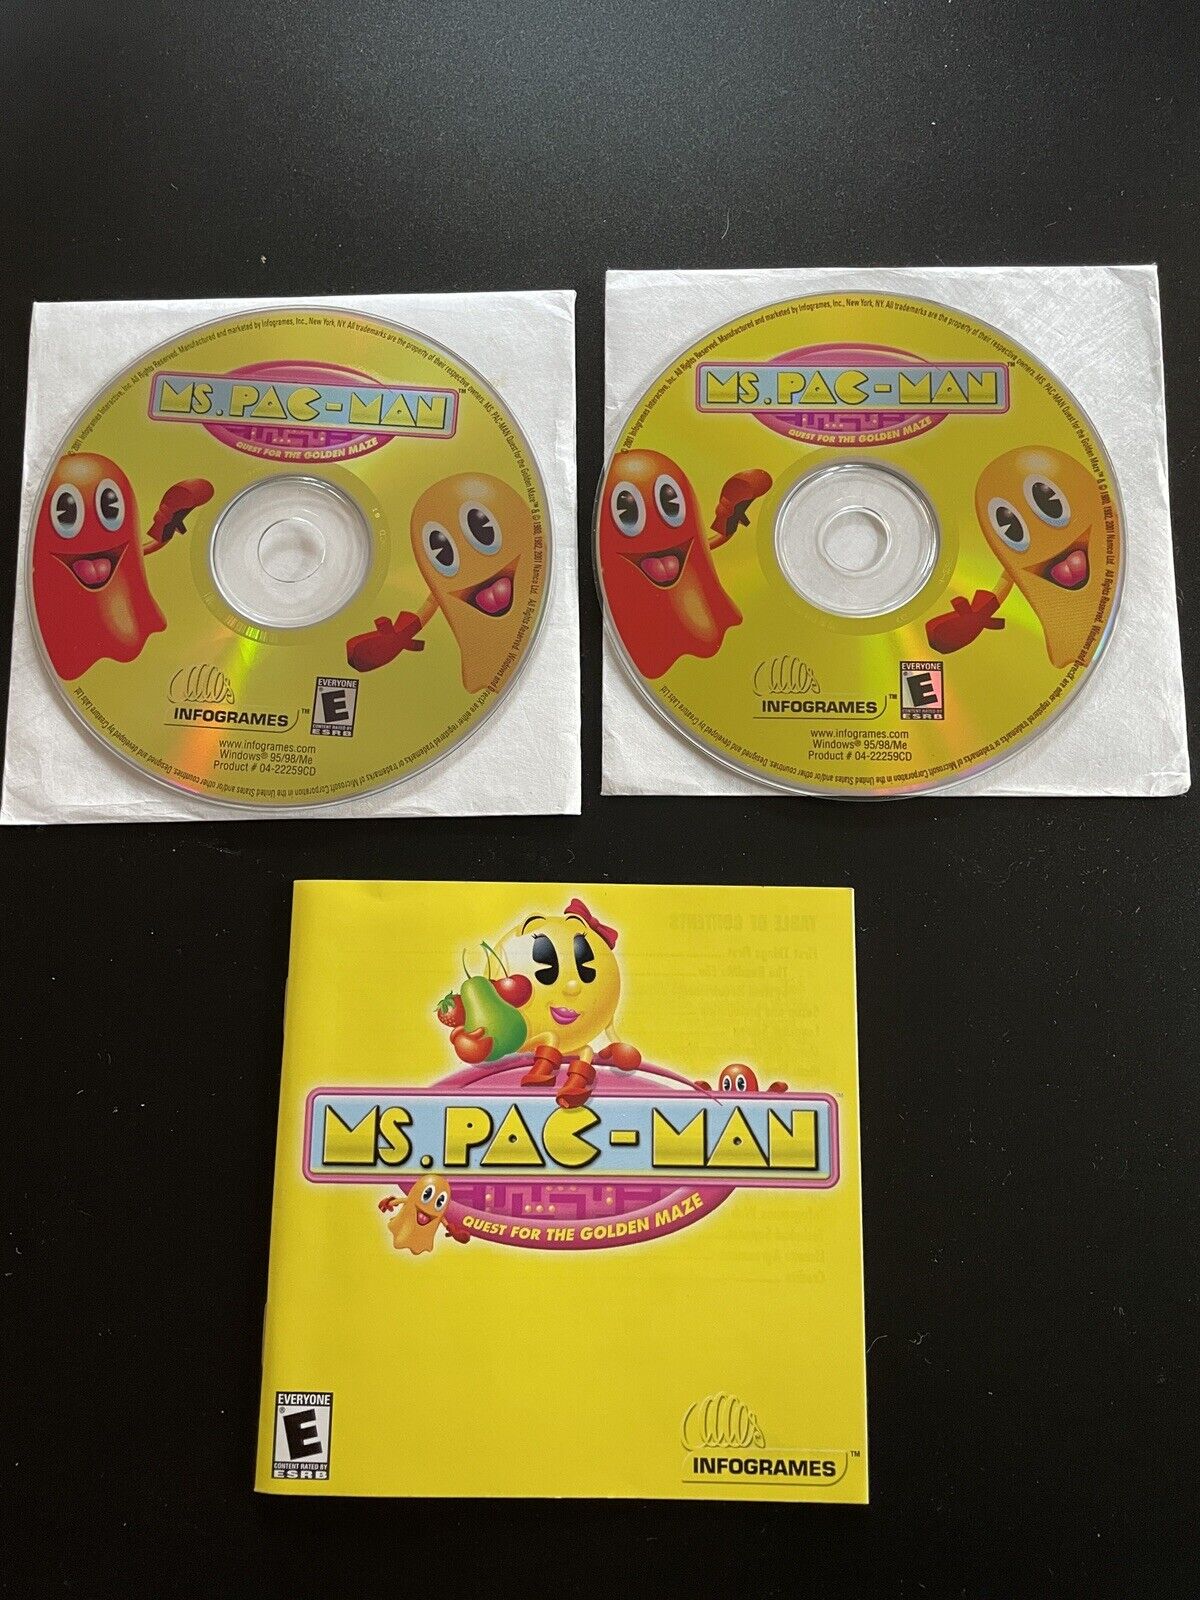 Ms. Pac-Man: Quest for the Golden Maze PC 2001 CD-ROM Game | Windows 95/98/ME